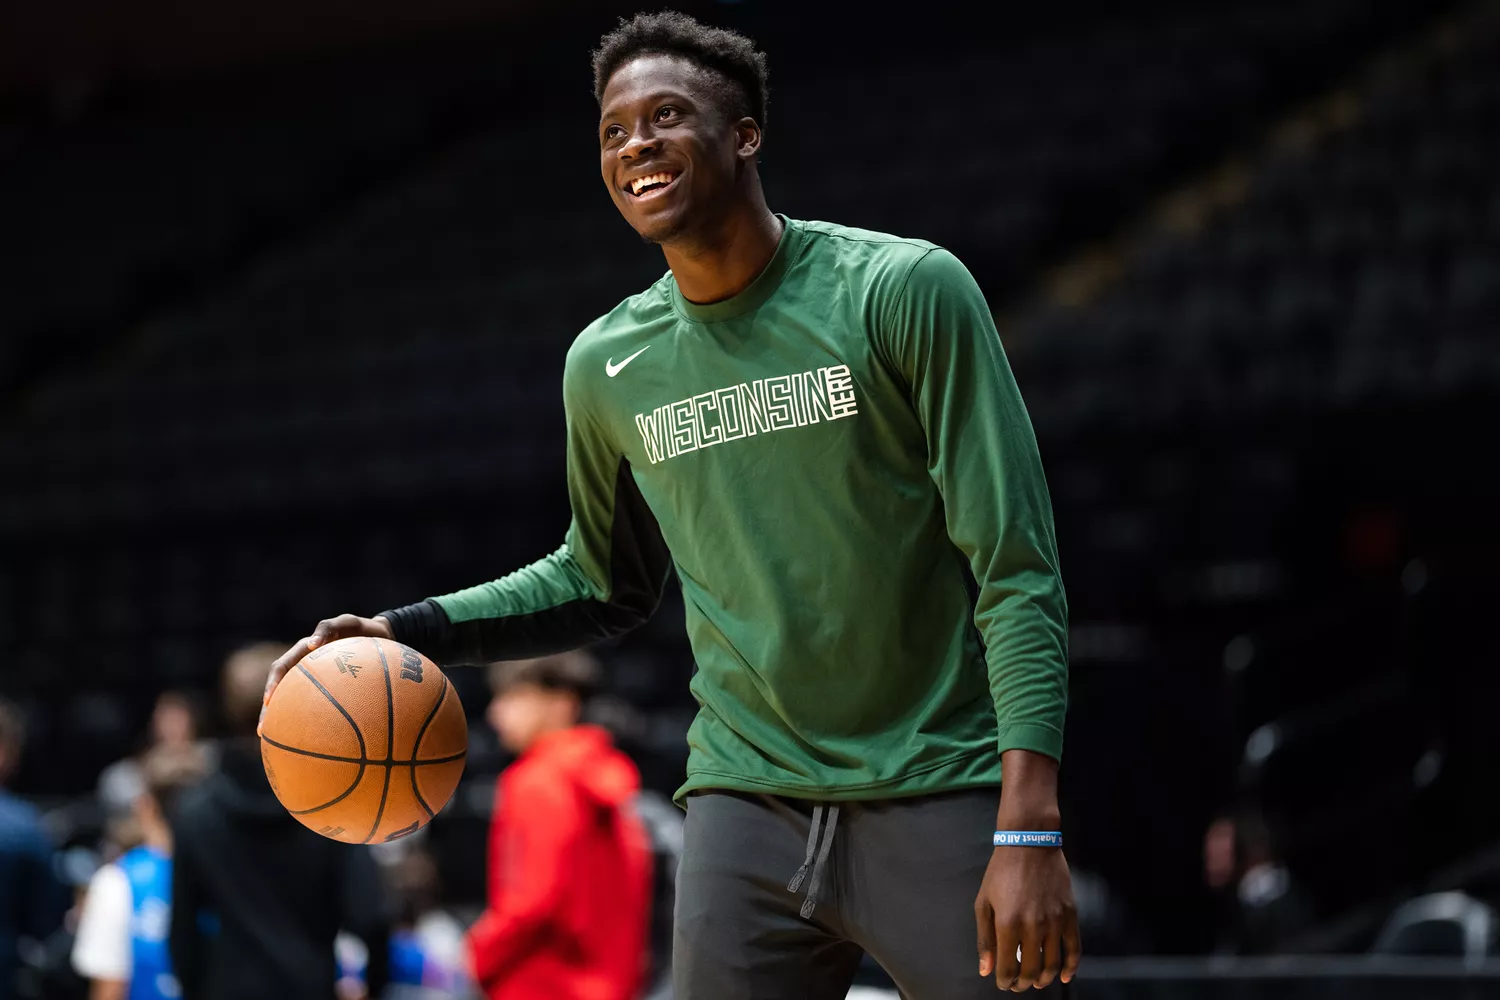 Alex Antetokounmpo #29 of the Wisconsin Herd smiles before the game against the Long Island Nets on January 30, 2023 at Nassau Coliseum in Uniondale, New York.